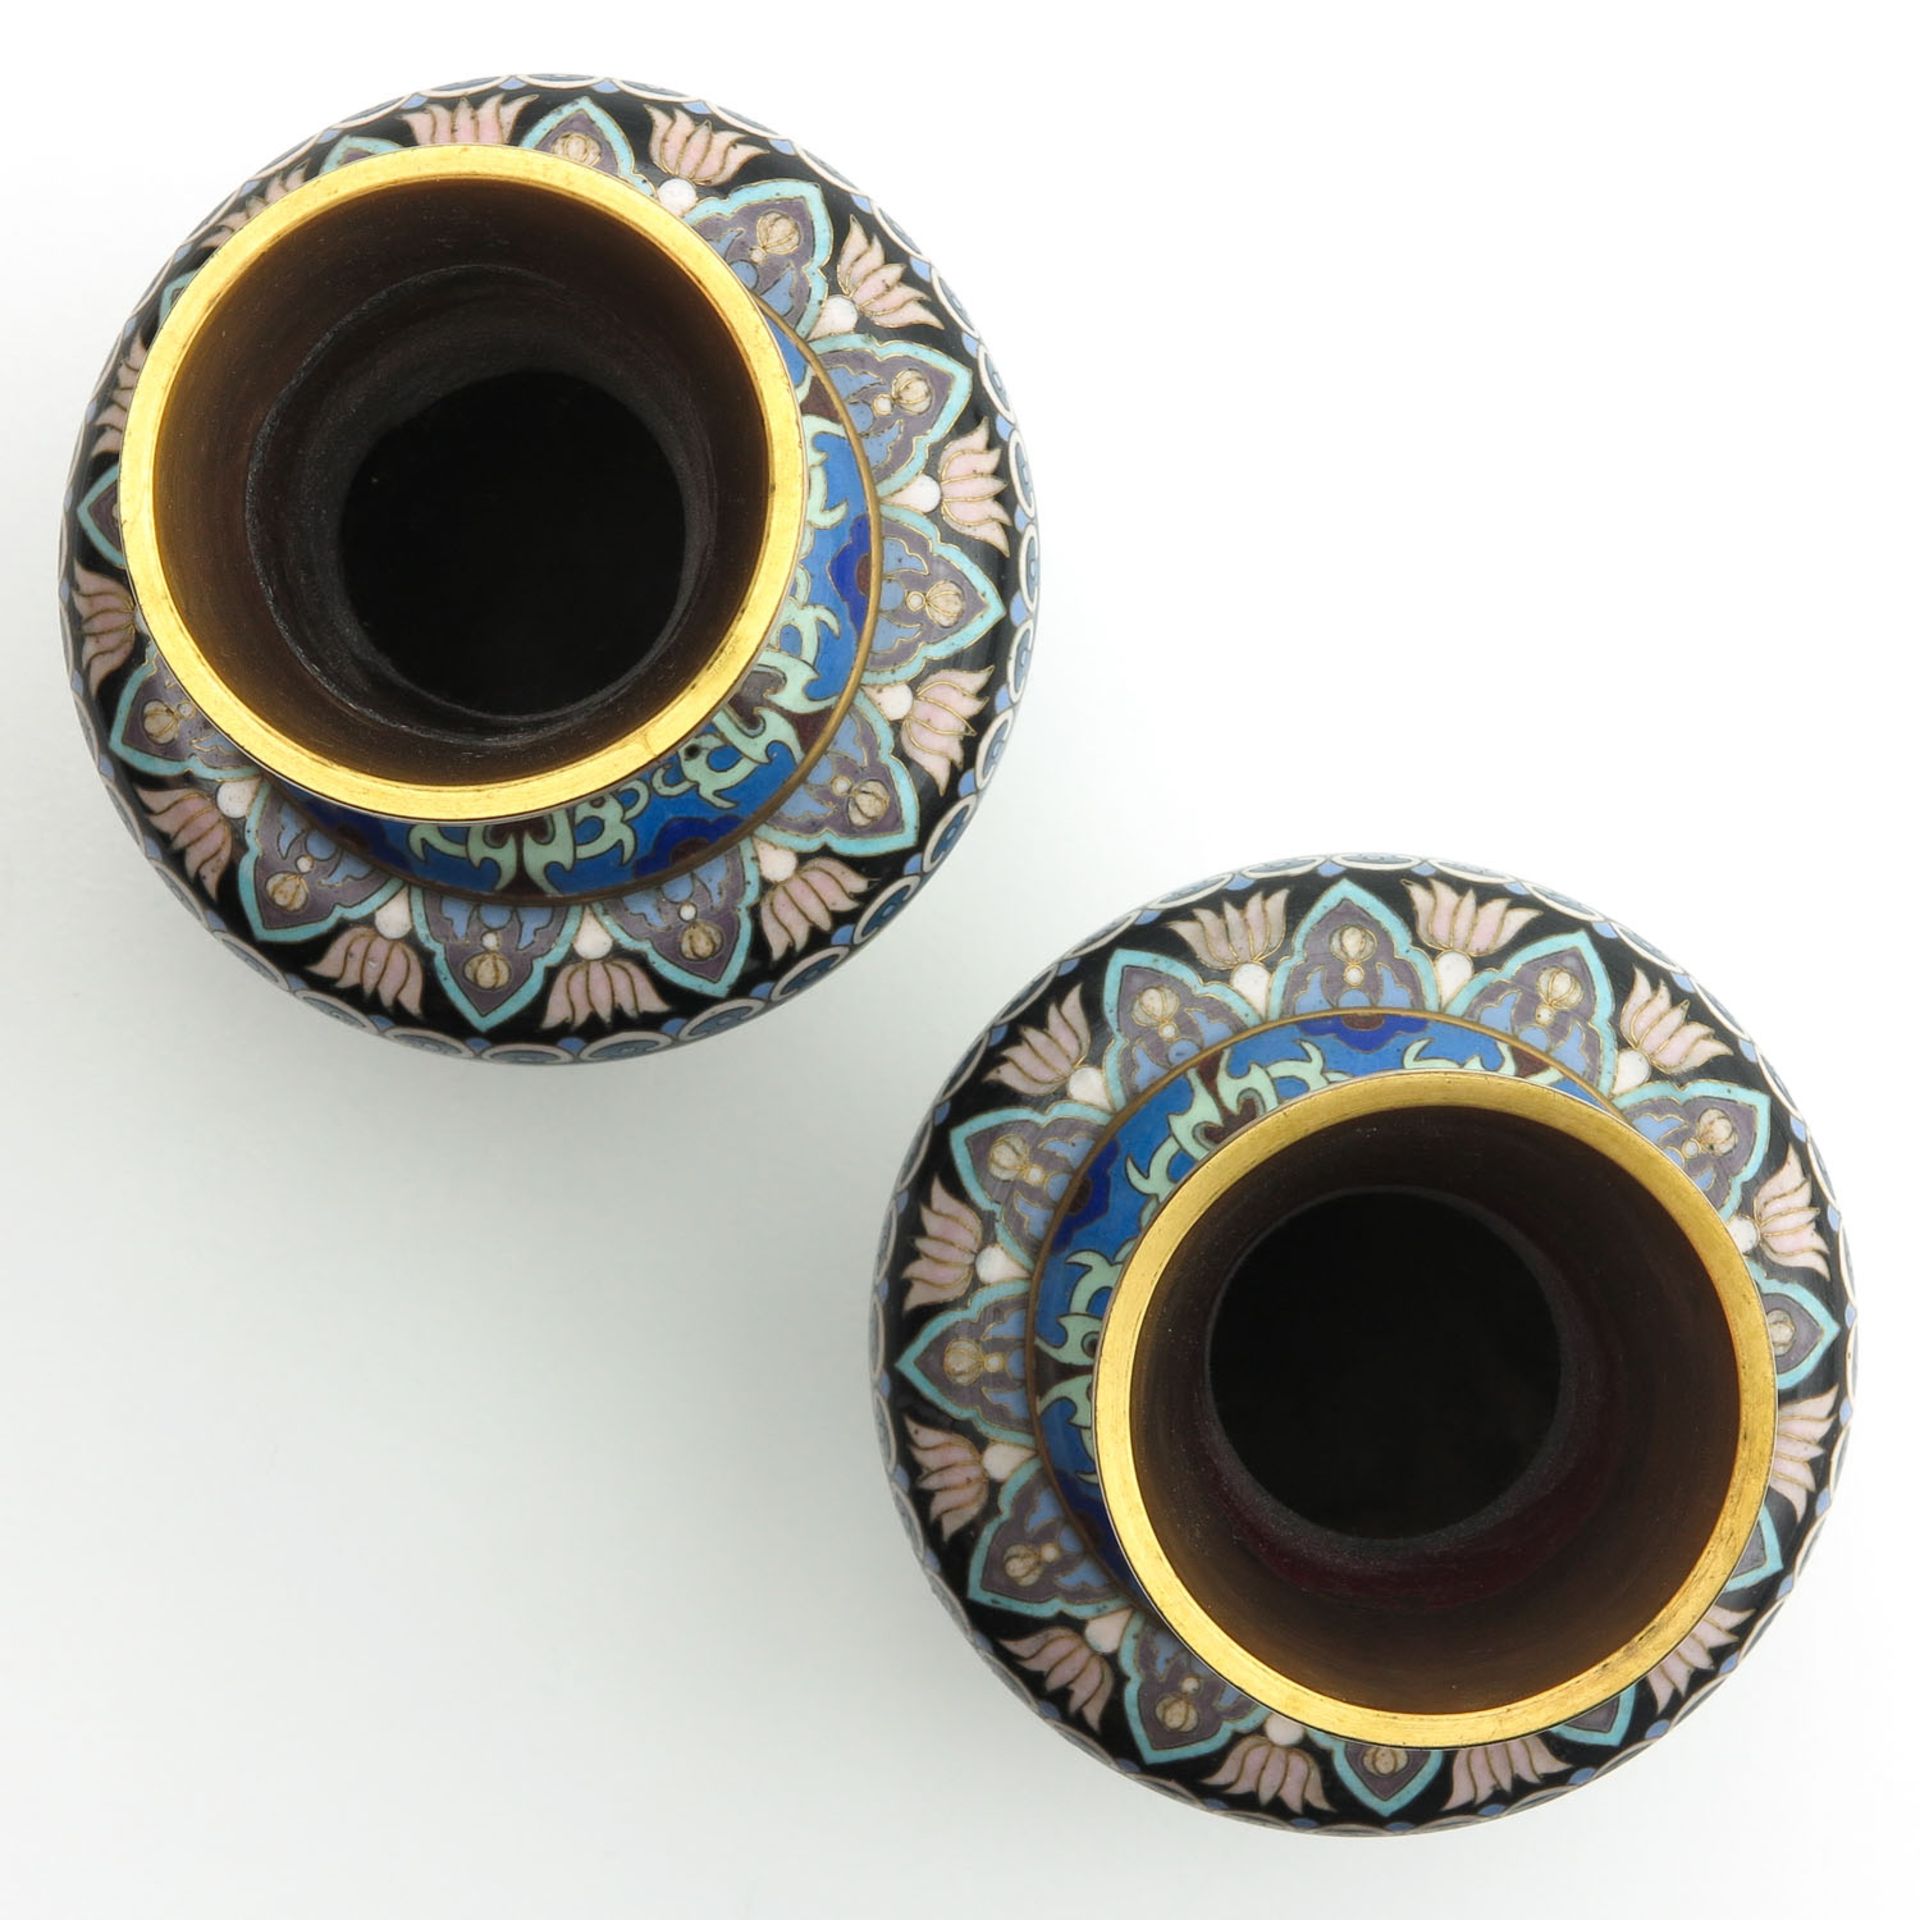 A Pair of Cloissone Vases - Image 5 of 9